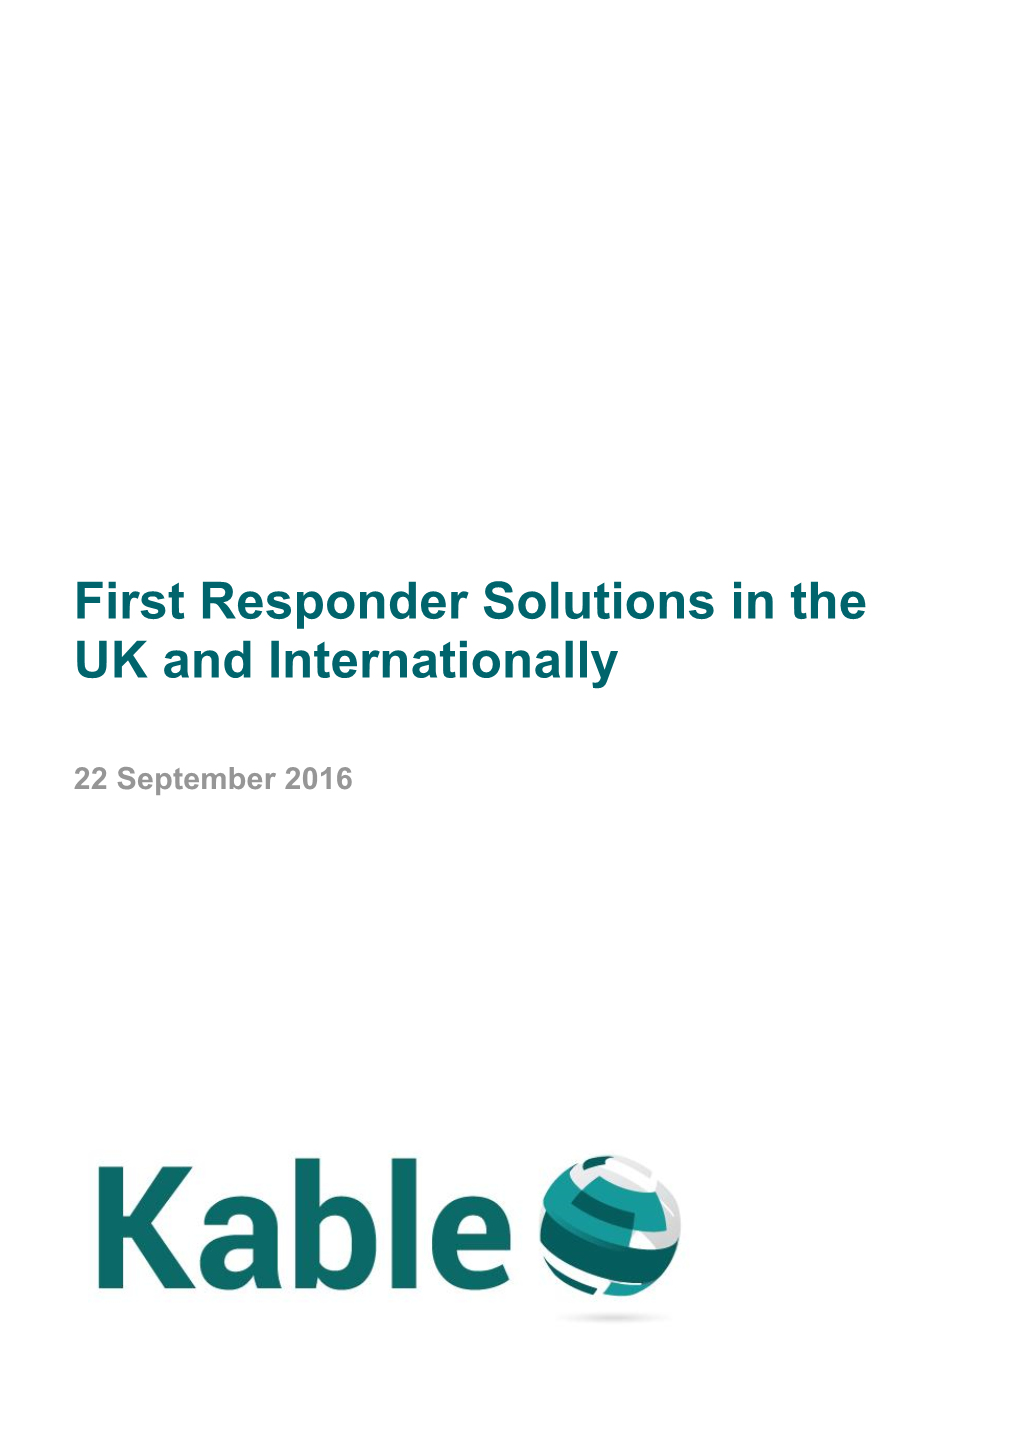 First Responder Solutions in the UK and Internationally